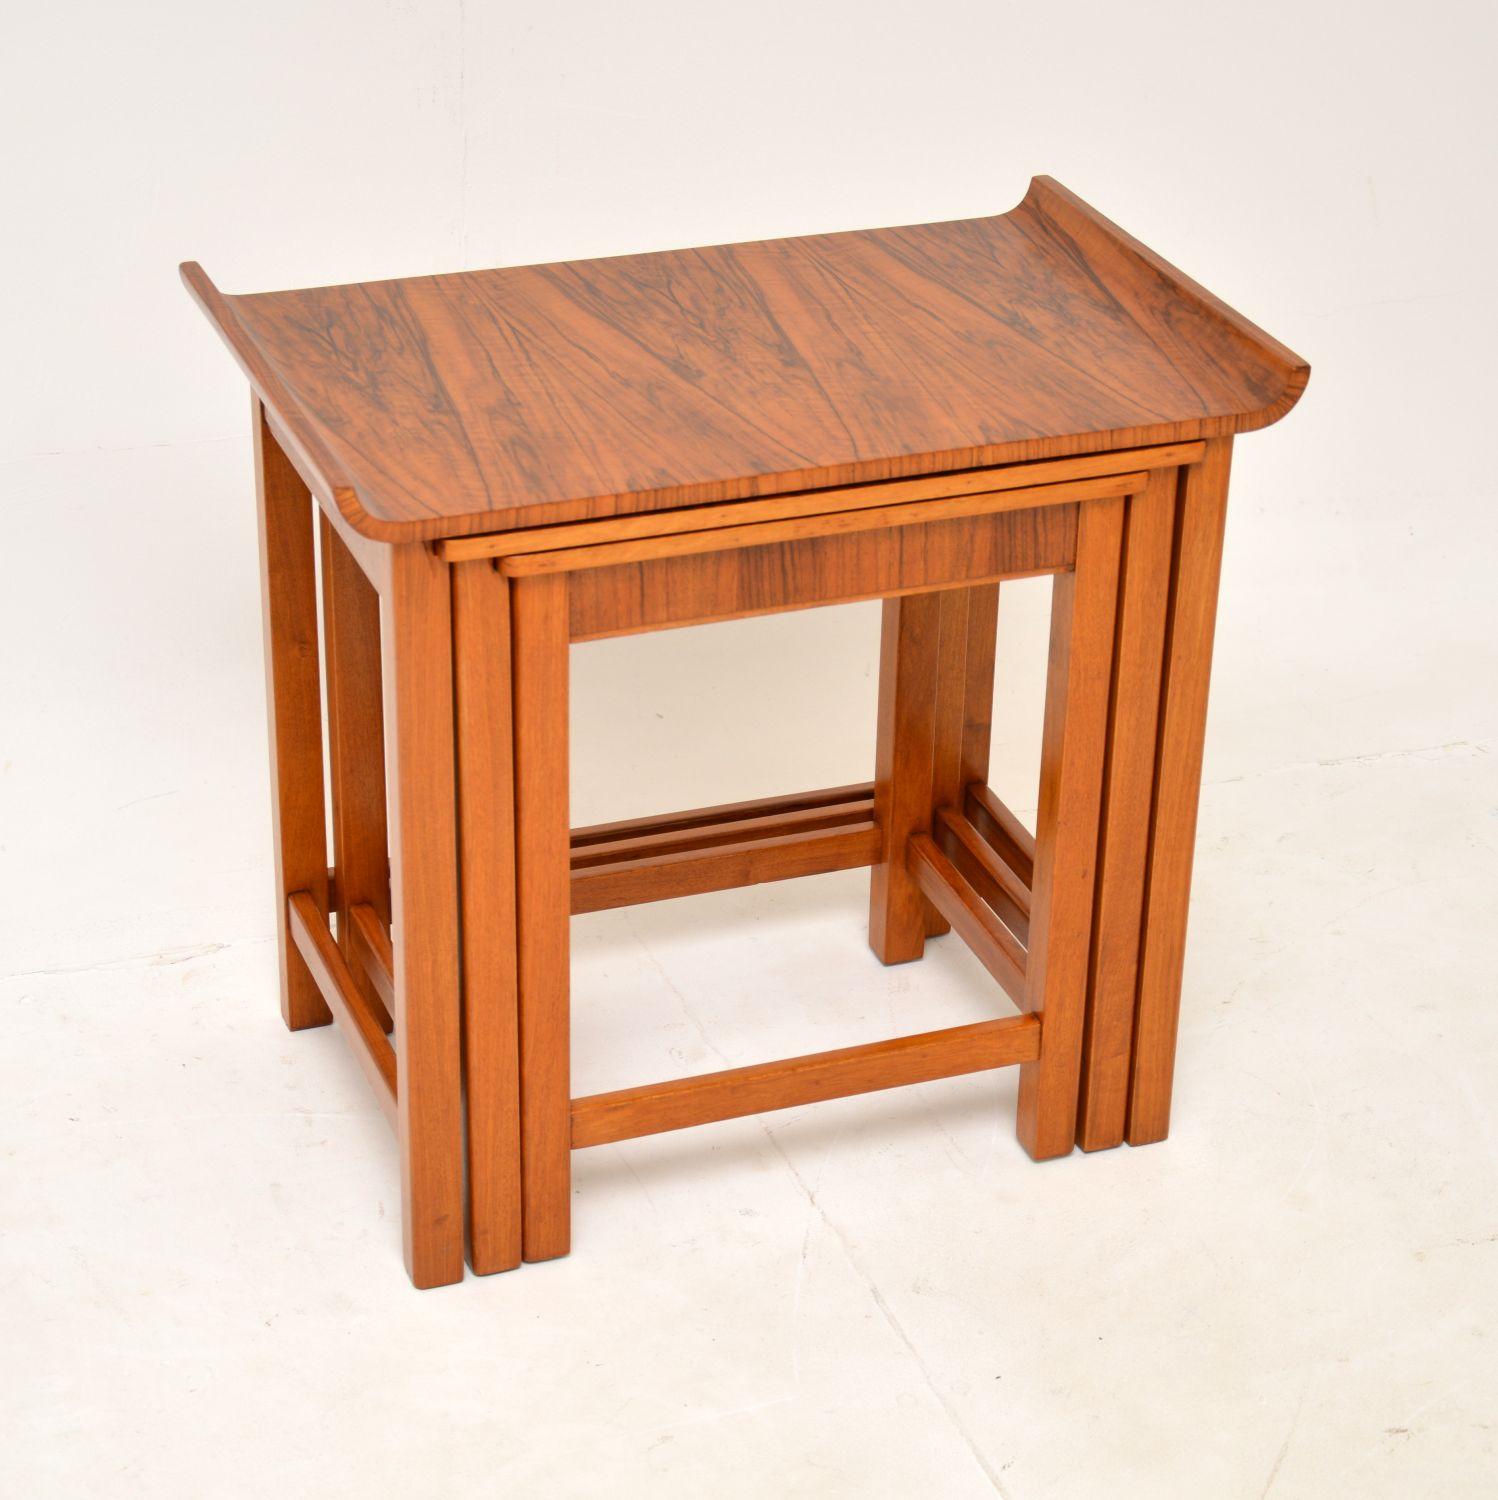 A superb original Art Deco period nest of tables in walnut, these were made in England and date from around the 1920-30’s.

They are of amazing quality and have a very stylish design. The tables nestle under one another very smoothly, the largest